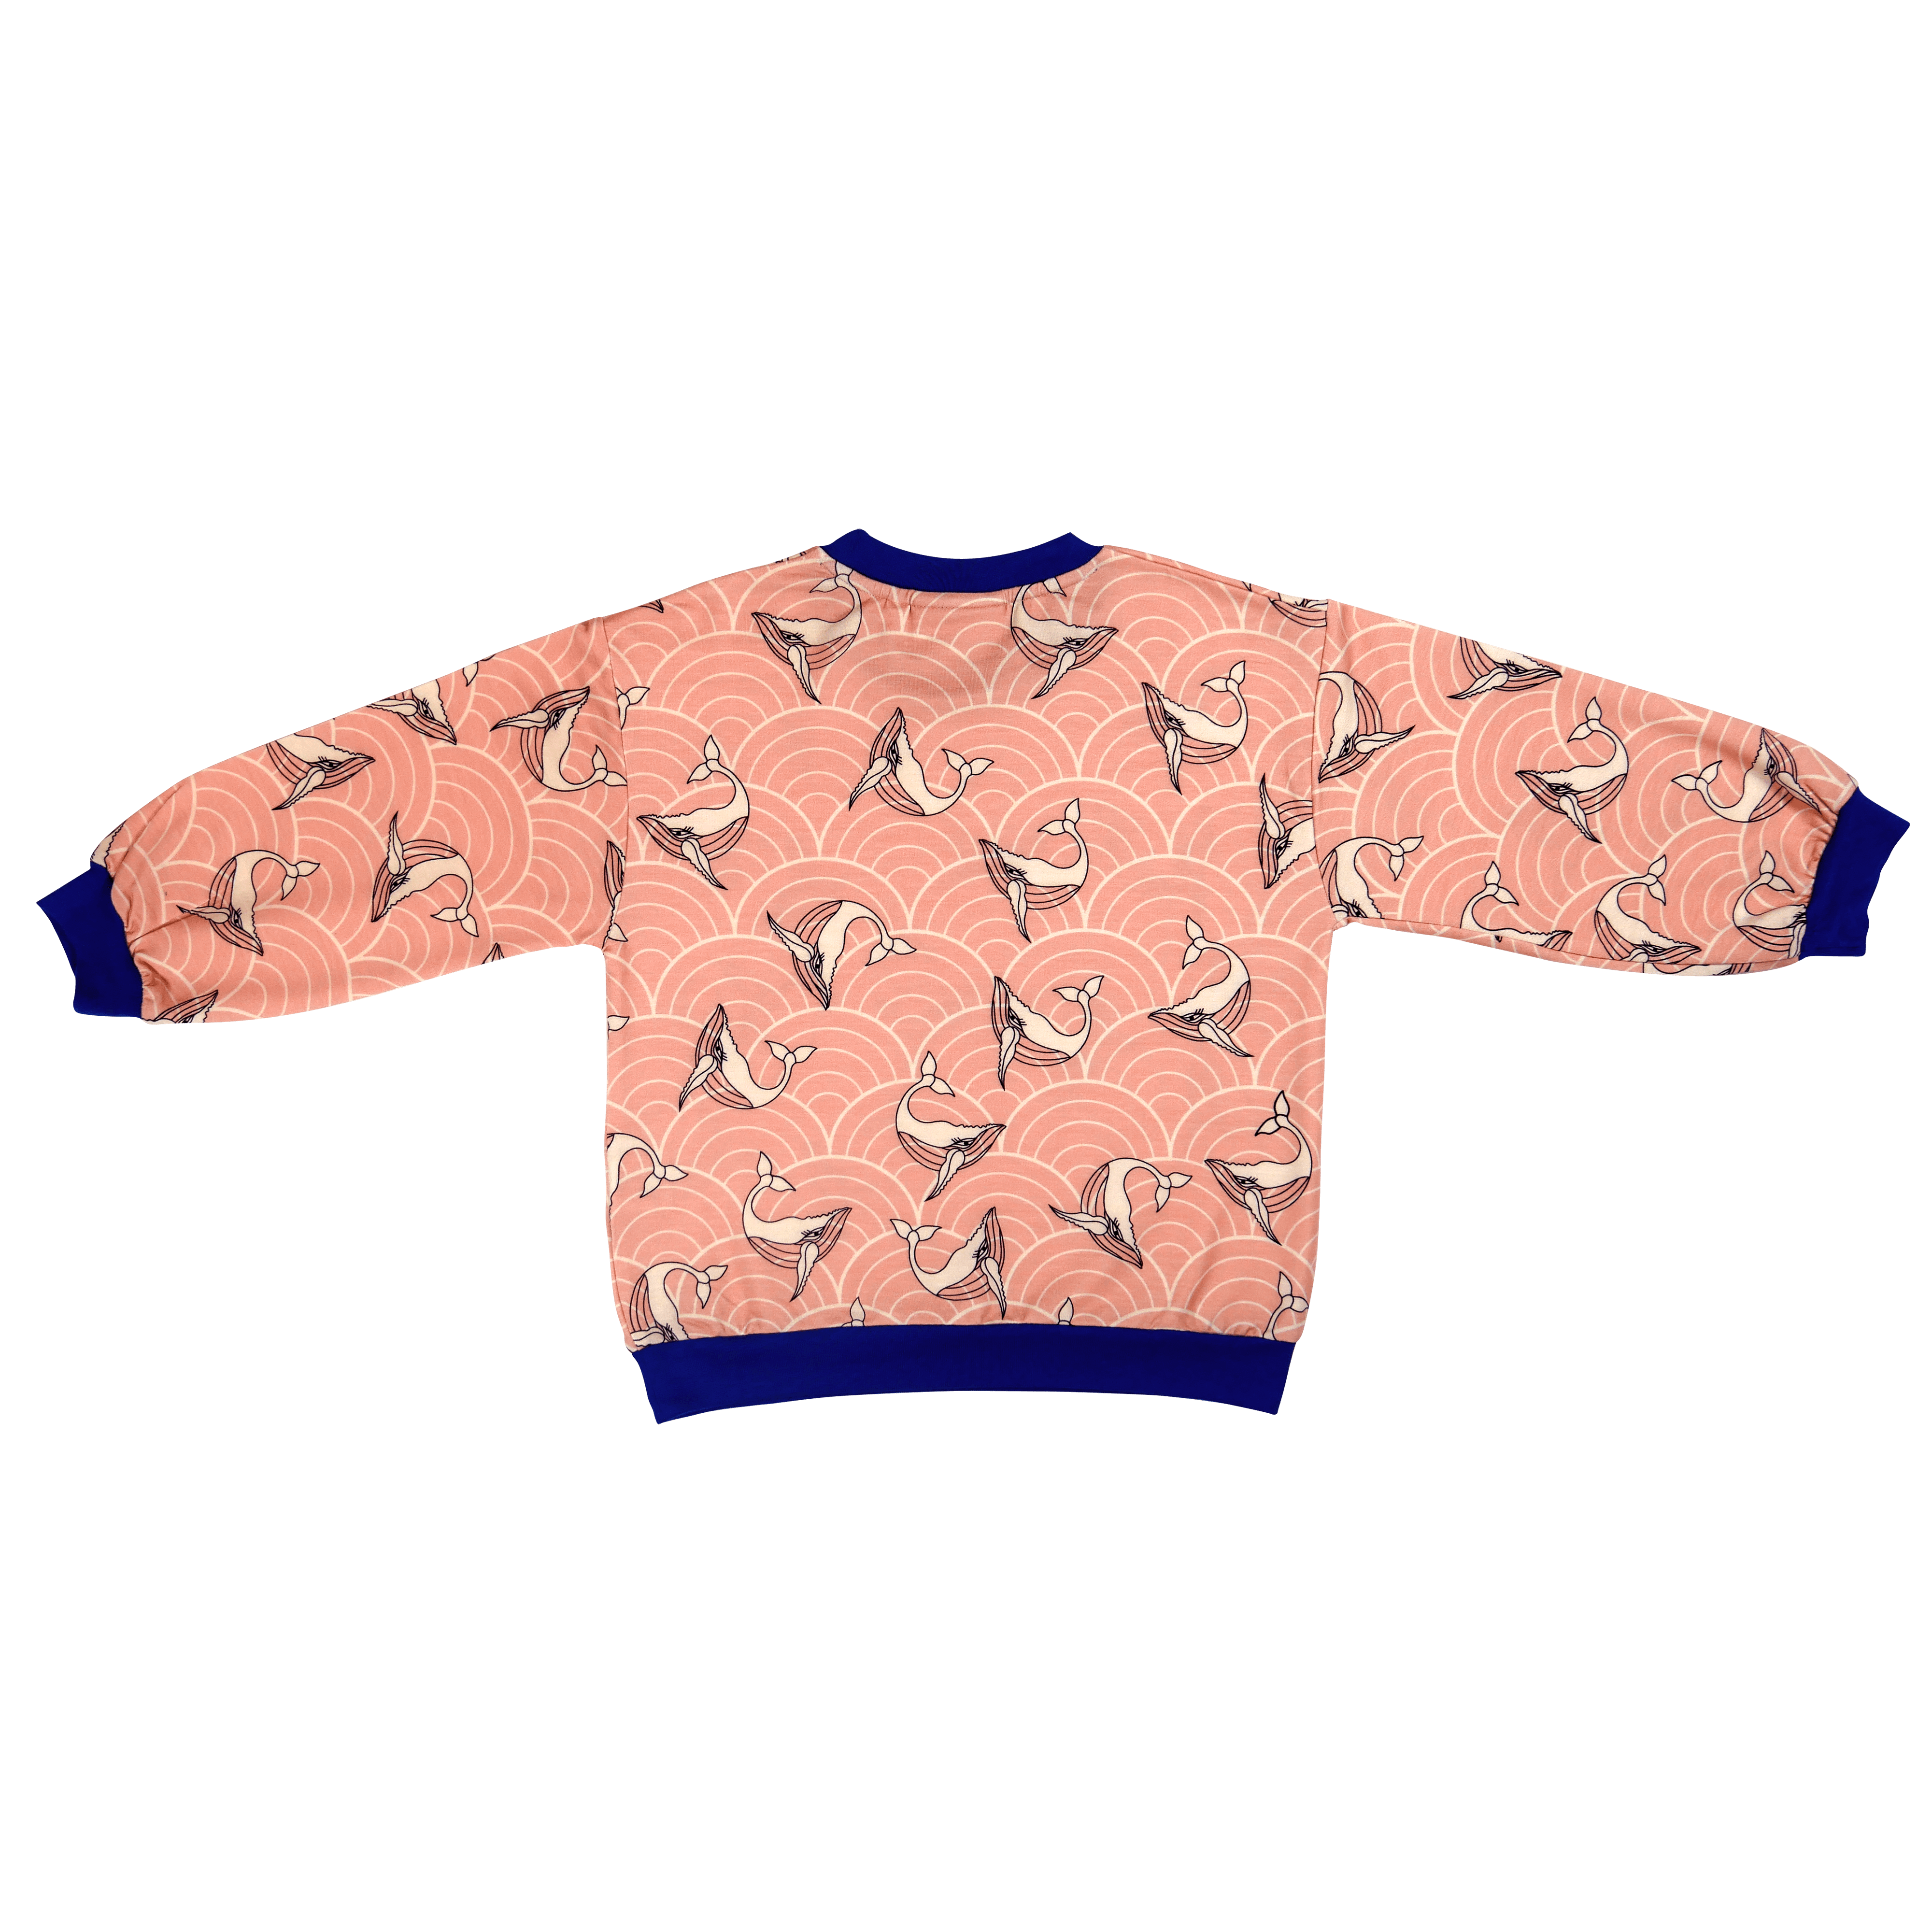  Peppelini sweater pink whale pattern Japanese sea patterns the backside